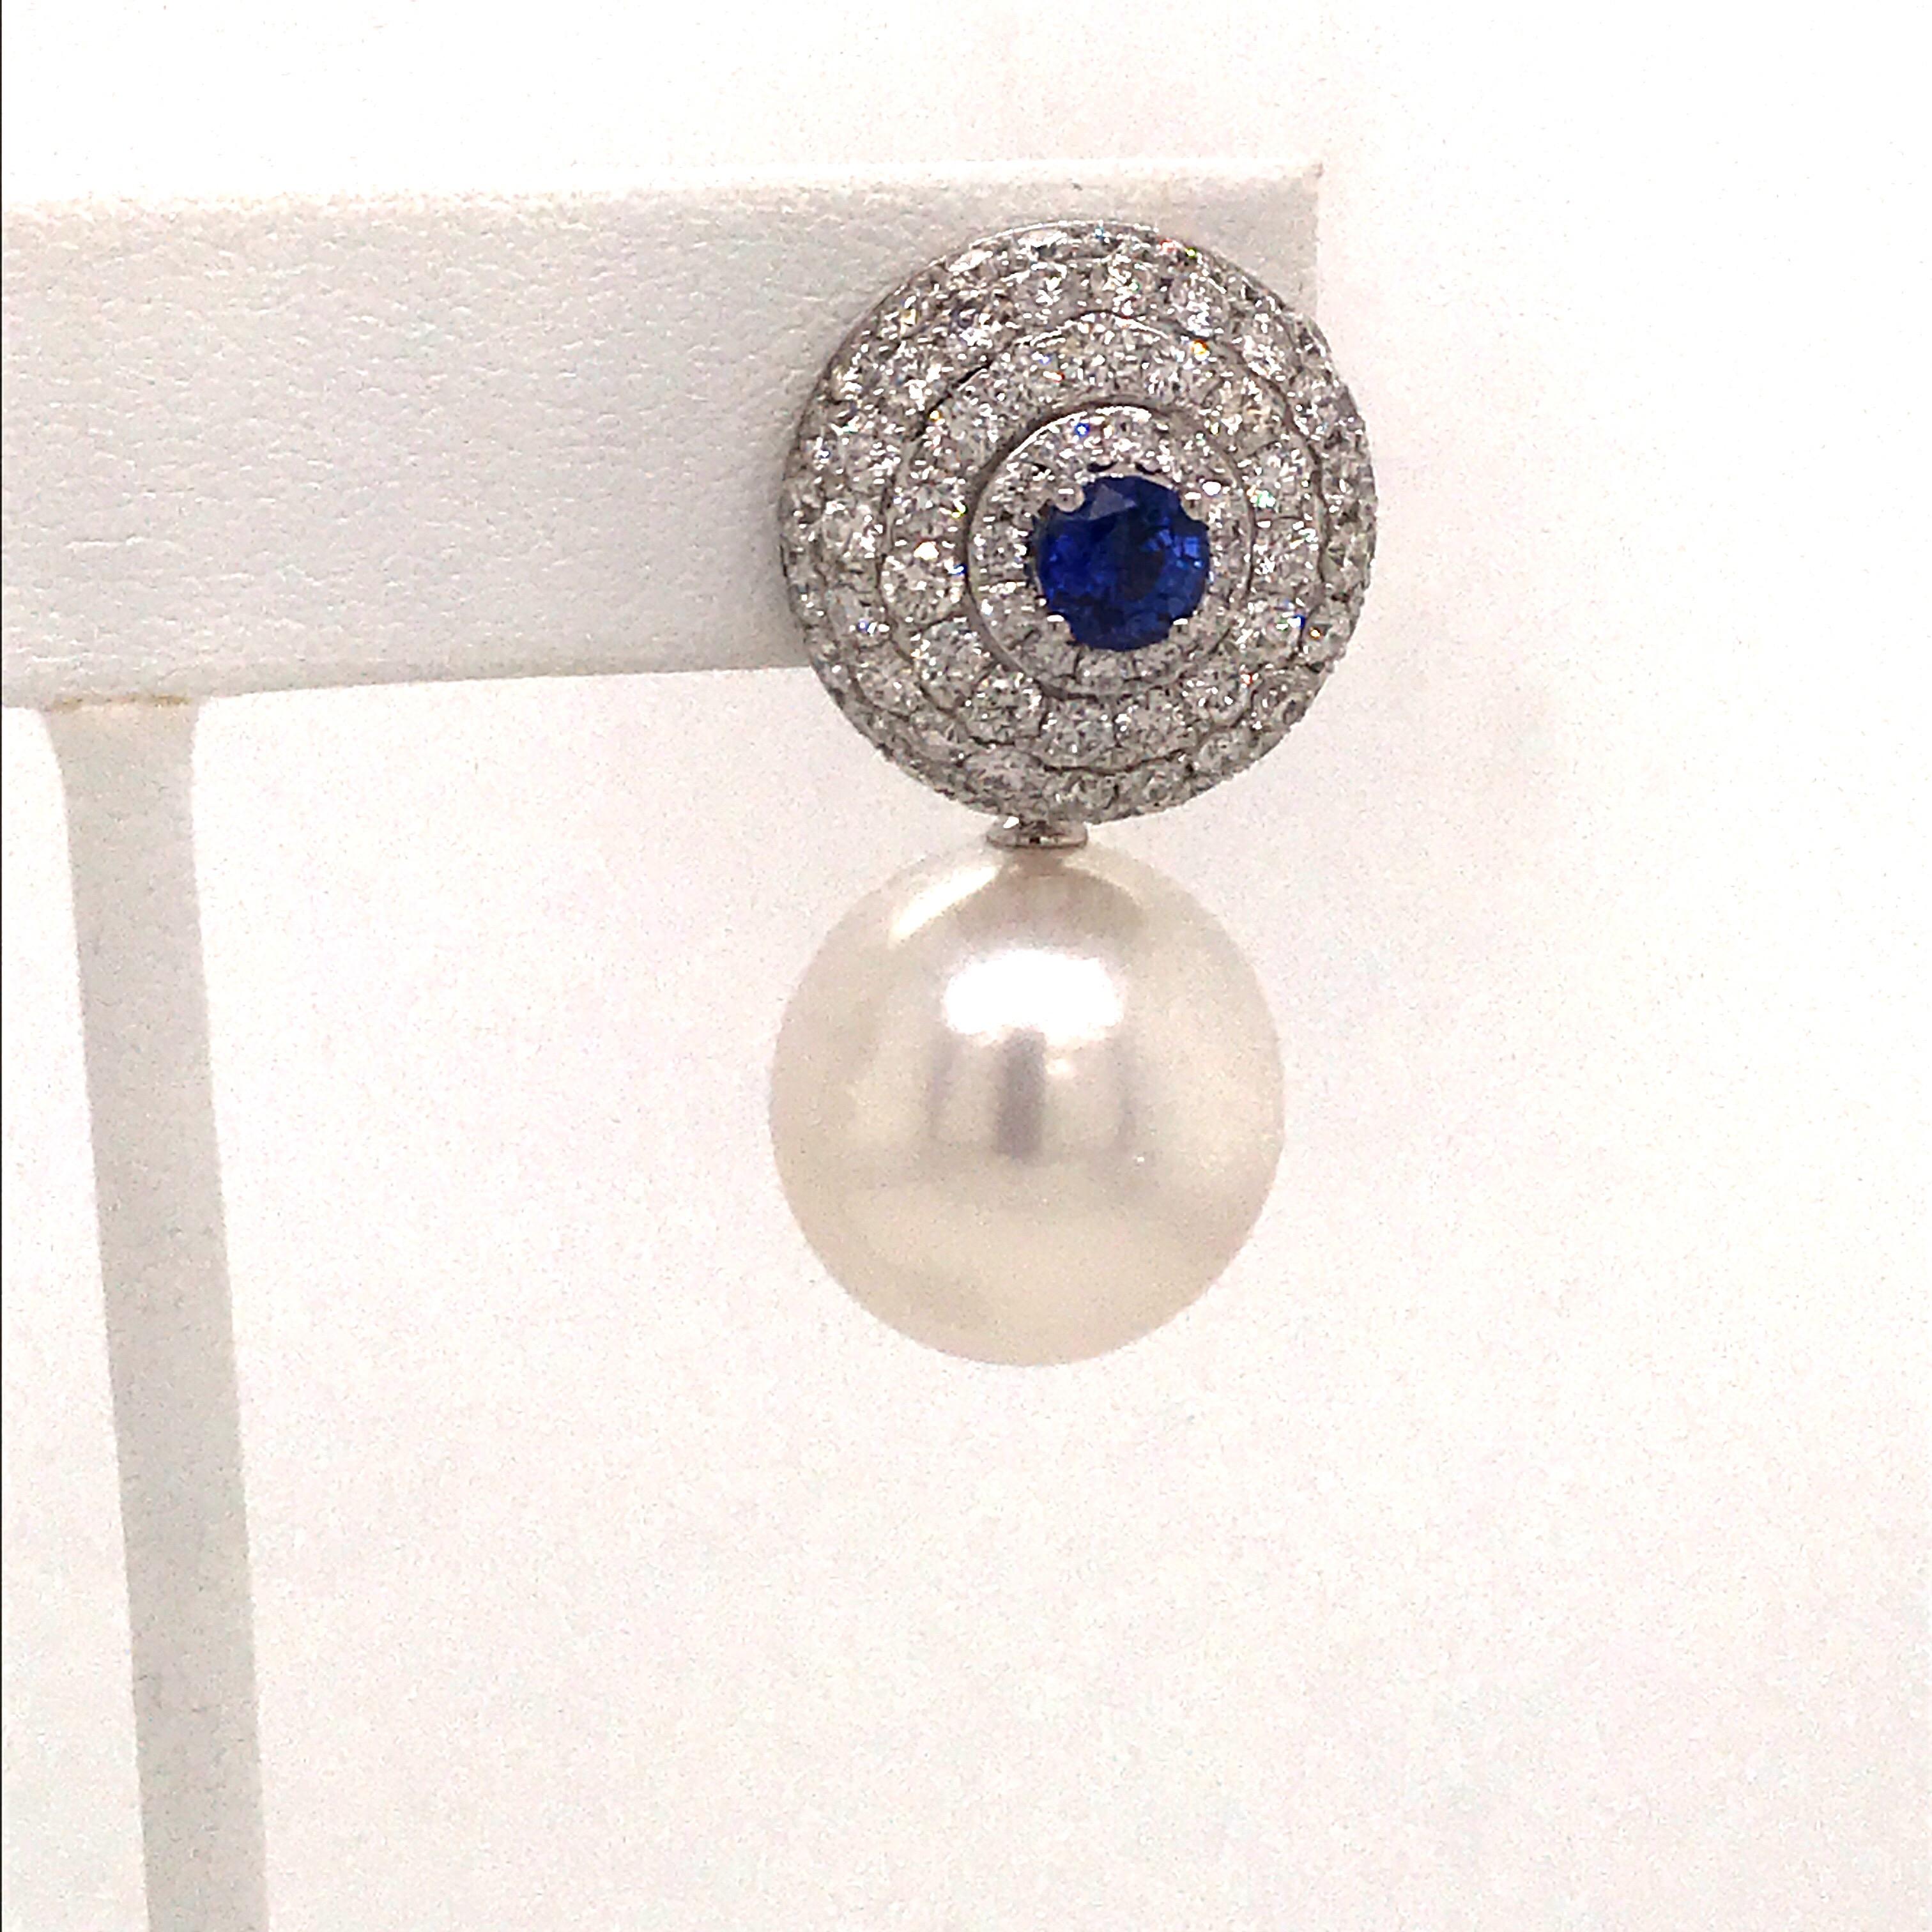 18K White gold earrings featuring 142 round brilliants weighing 3.75 carats with two center sapphires weighing 0.95 carats and white South Sea Pearls measuring 14-15 mm.